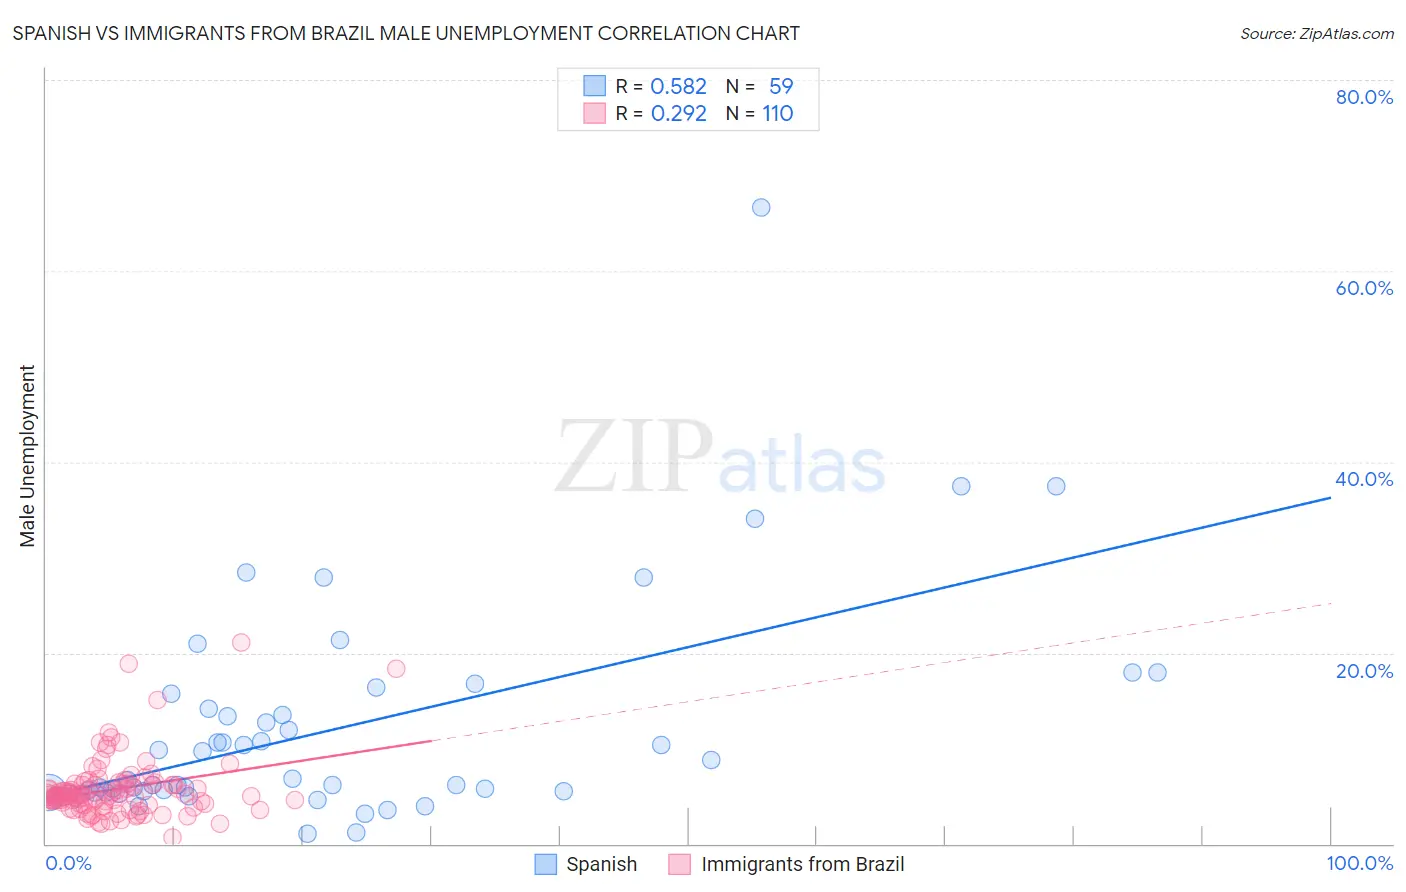 Spanish vs Immigrants from Brazil Male Unemployment